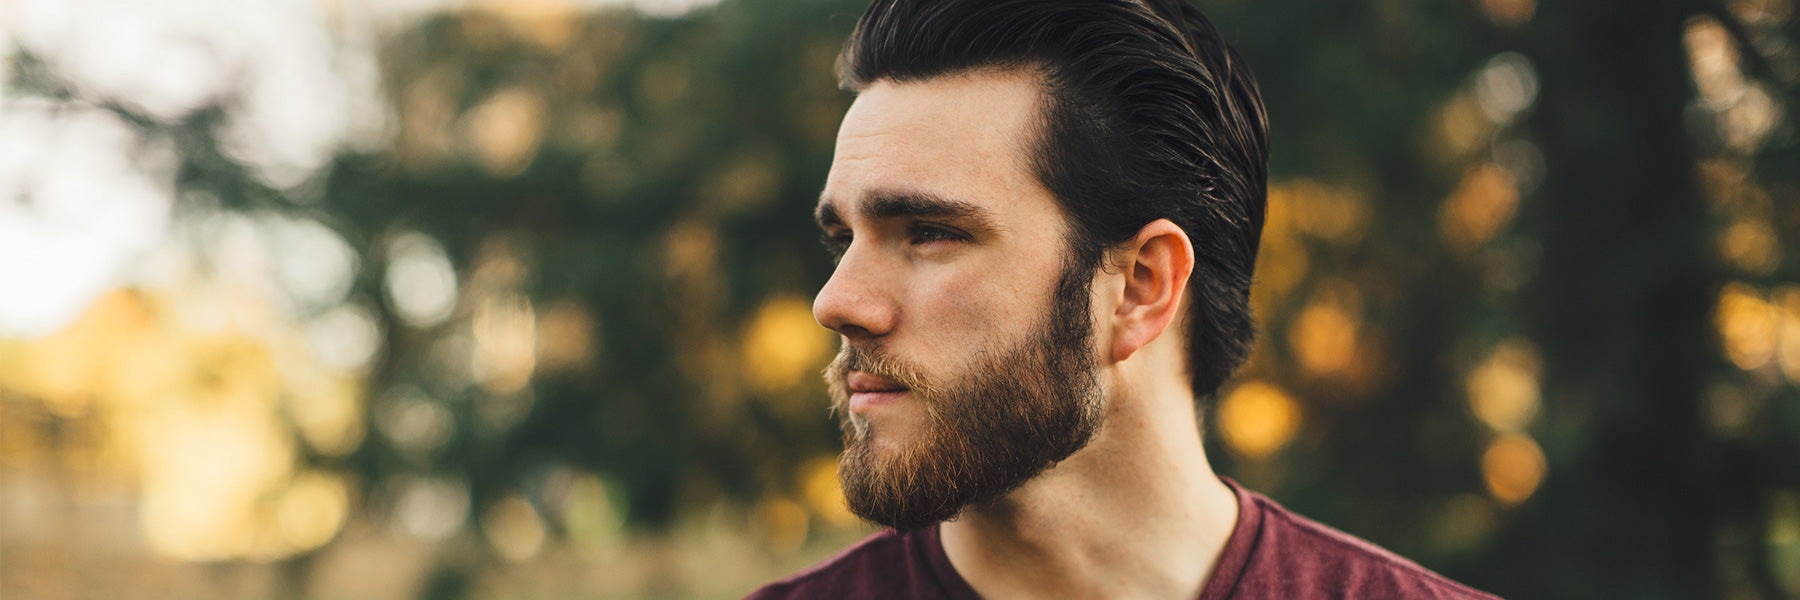 Top 6 Beard Growing Mistakes and How to Avoid Them